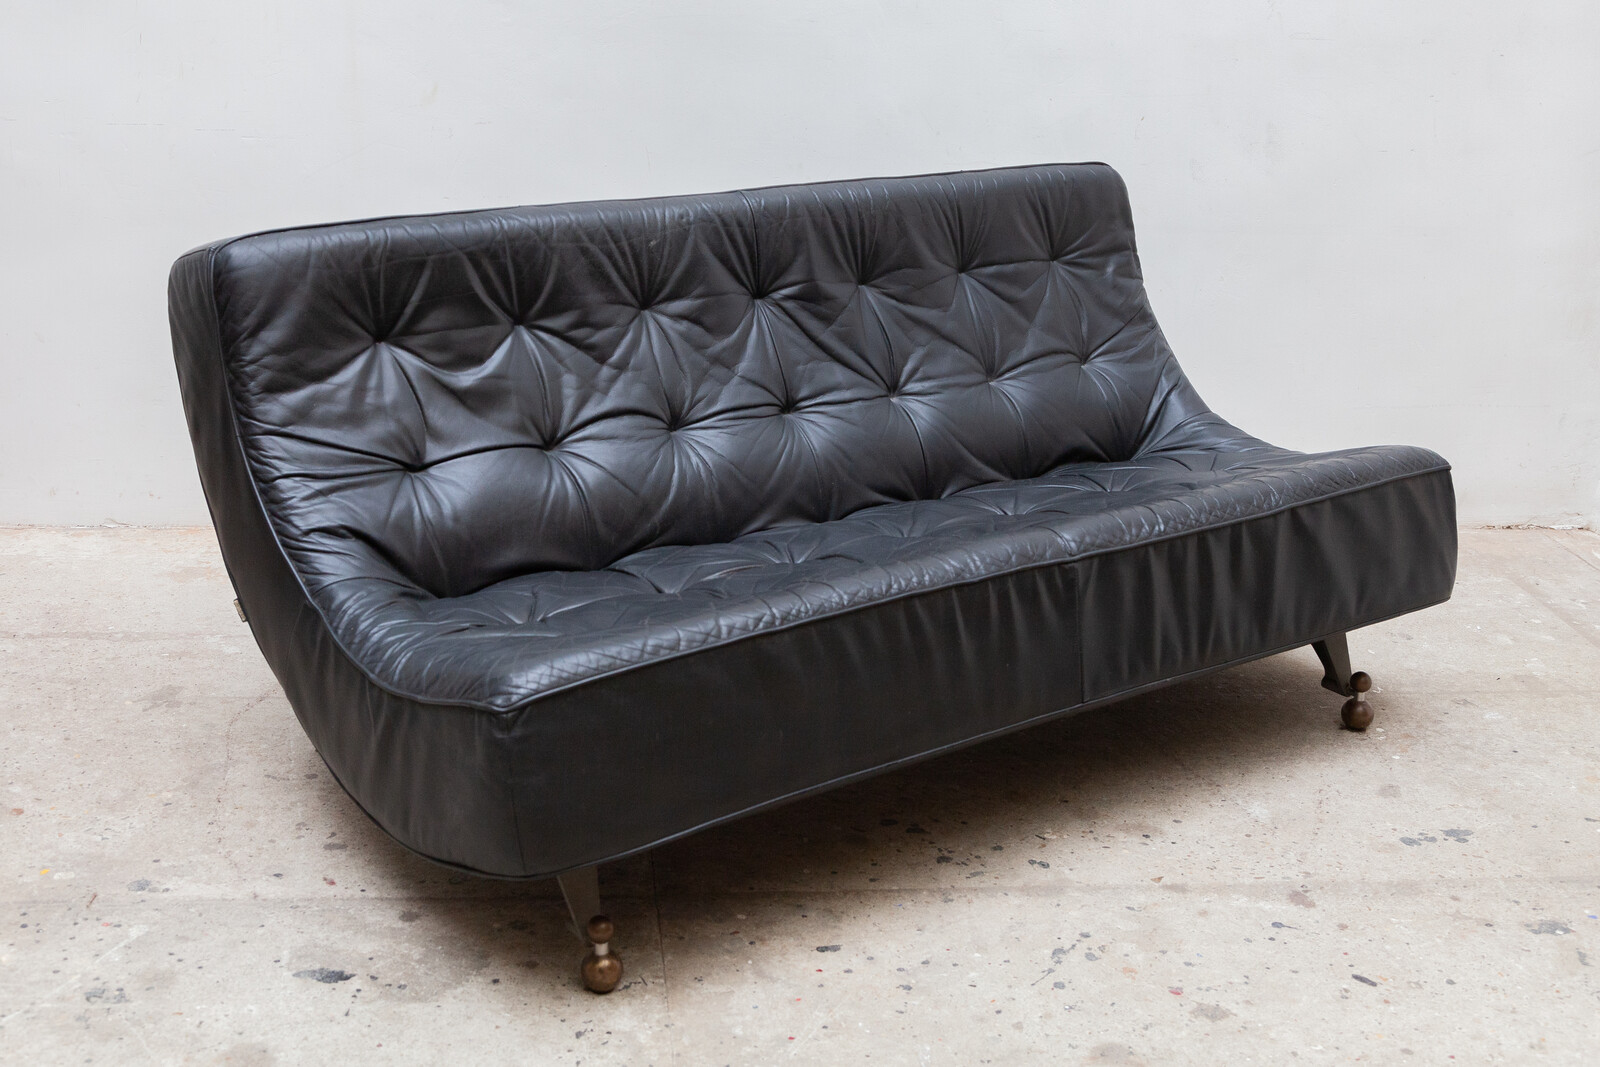 by DECORATIVE Netherlands Akanthos - Leather Tufted Items Added ANTIQUES 1980s, Montis - & - Interiors European Recent Berg Gerard Eclectic Sofa van Black den